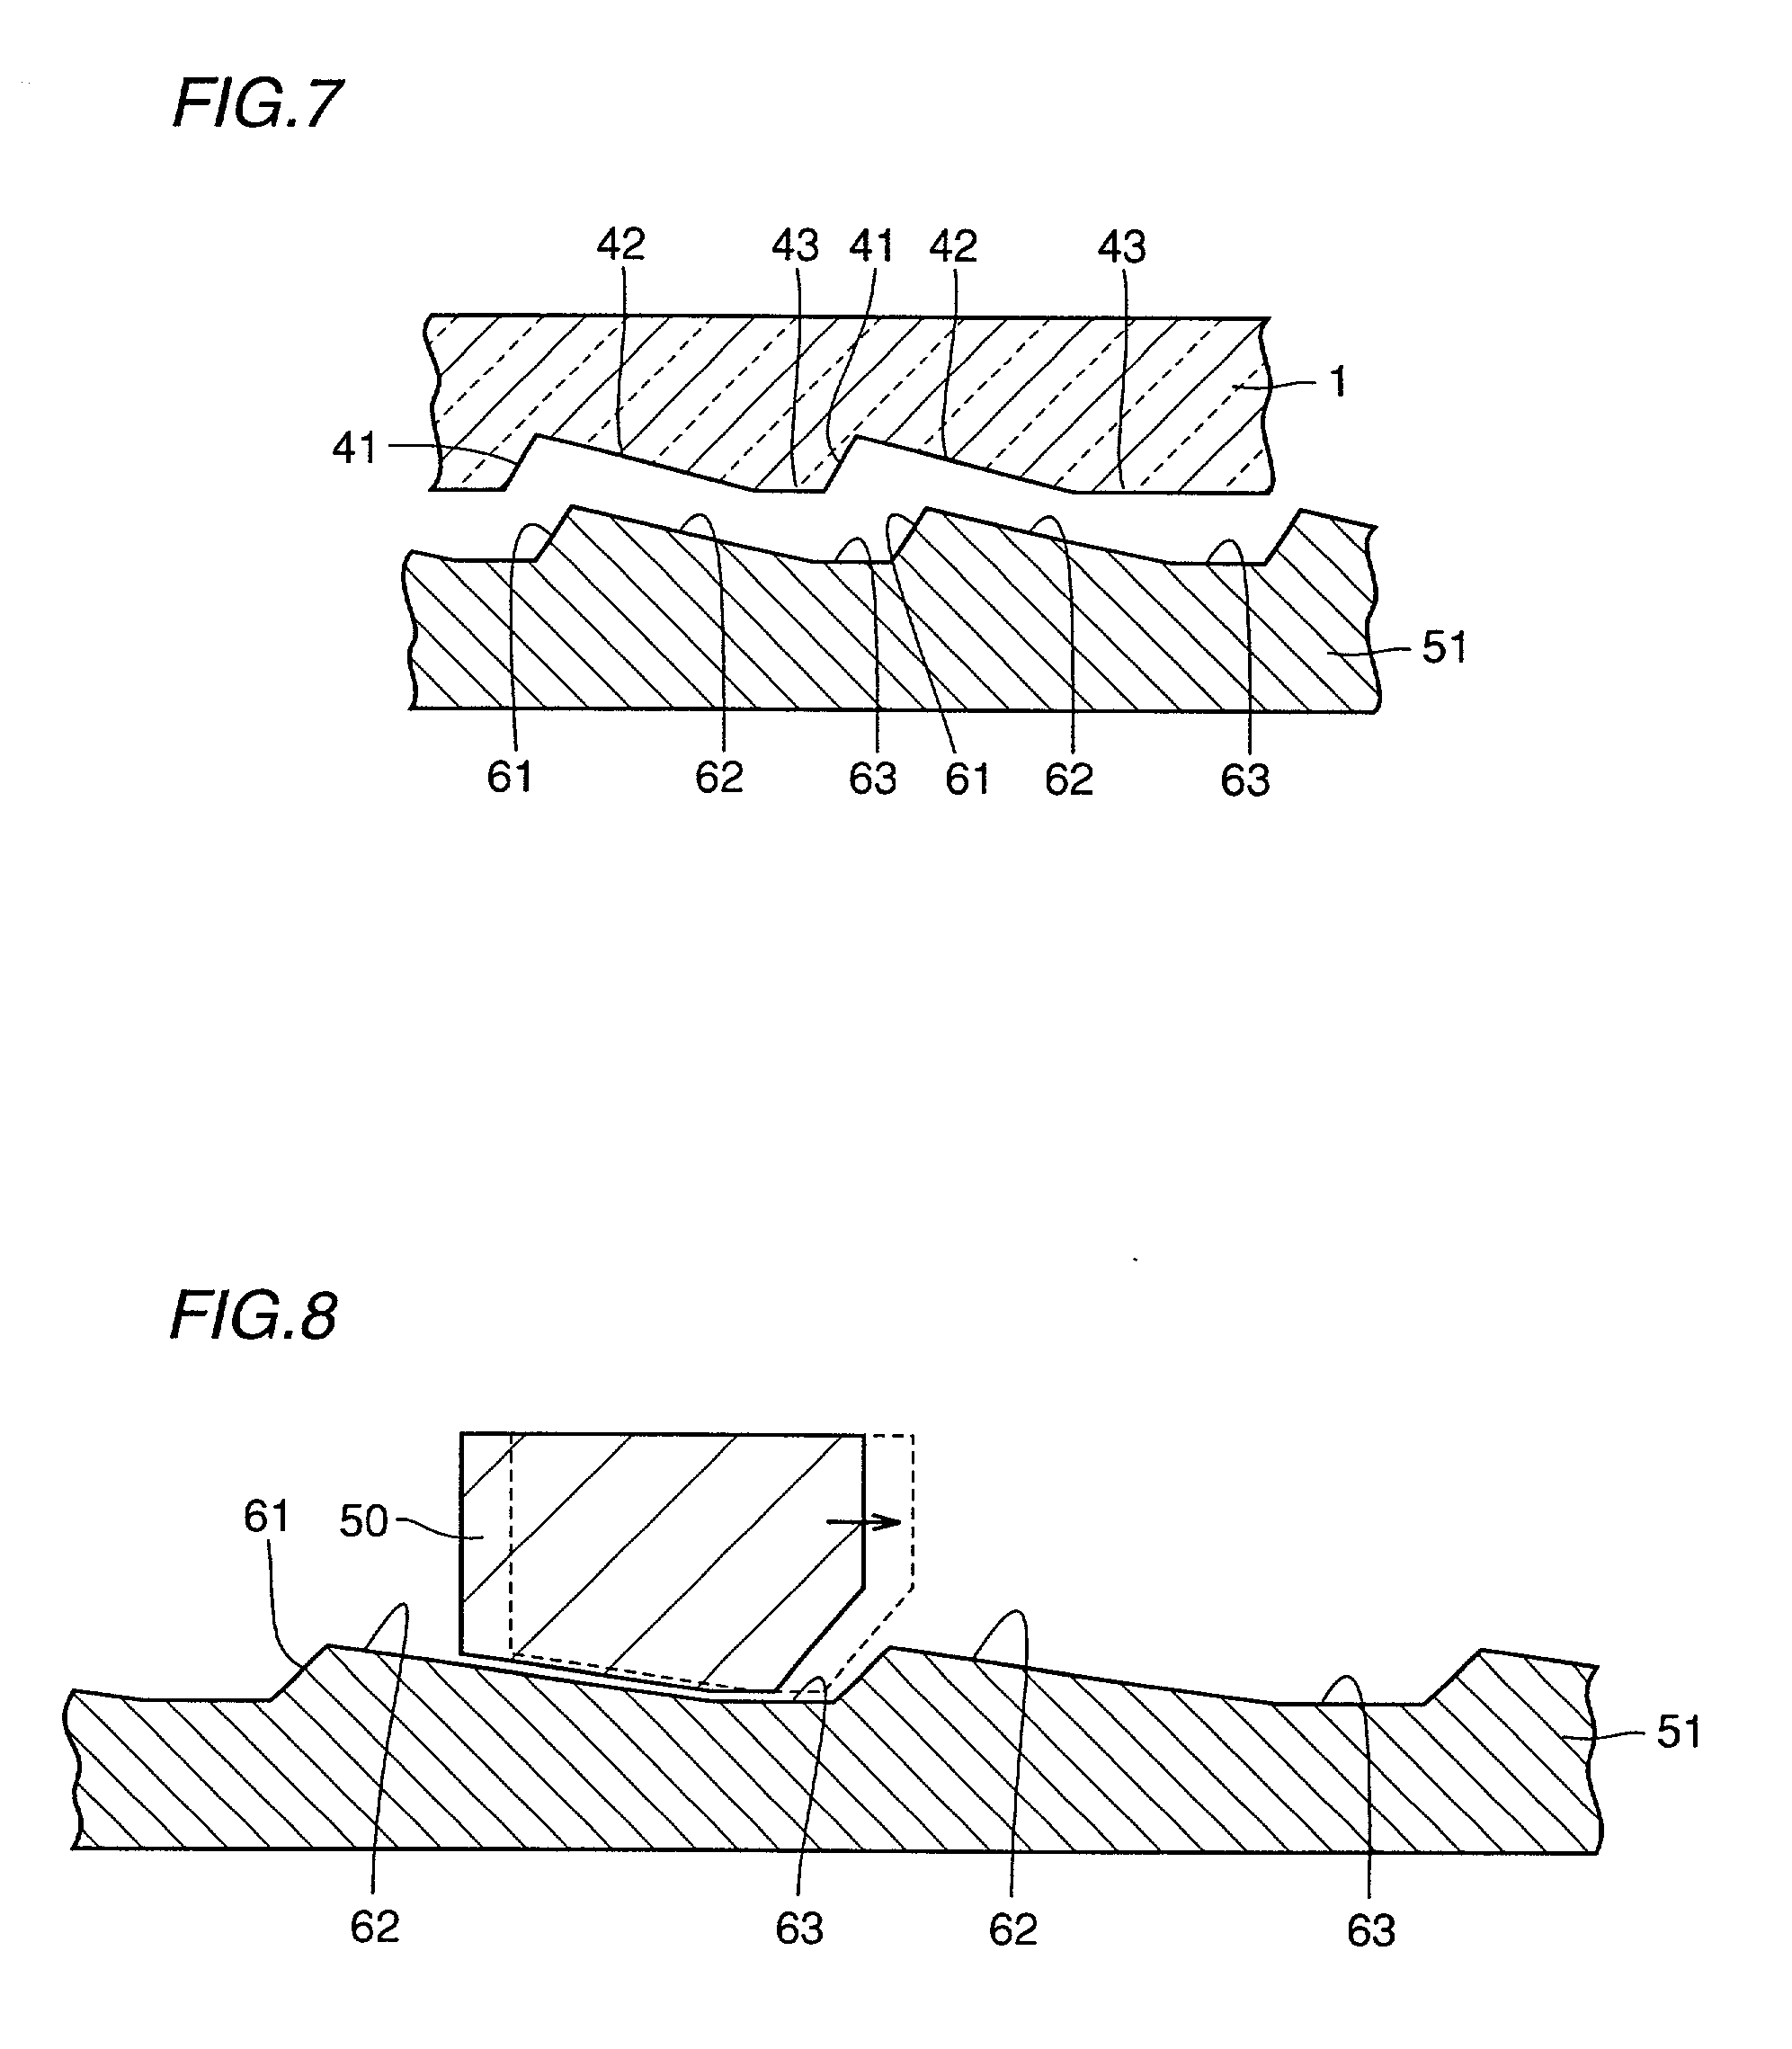 Front light, reflective liquid crystal display device and personal digital assistant